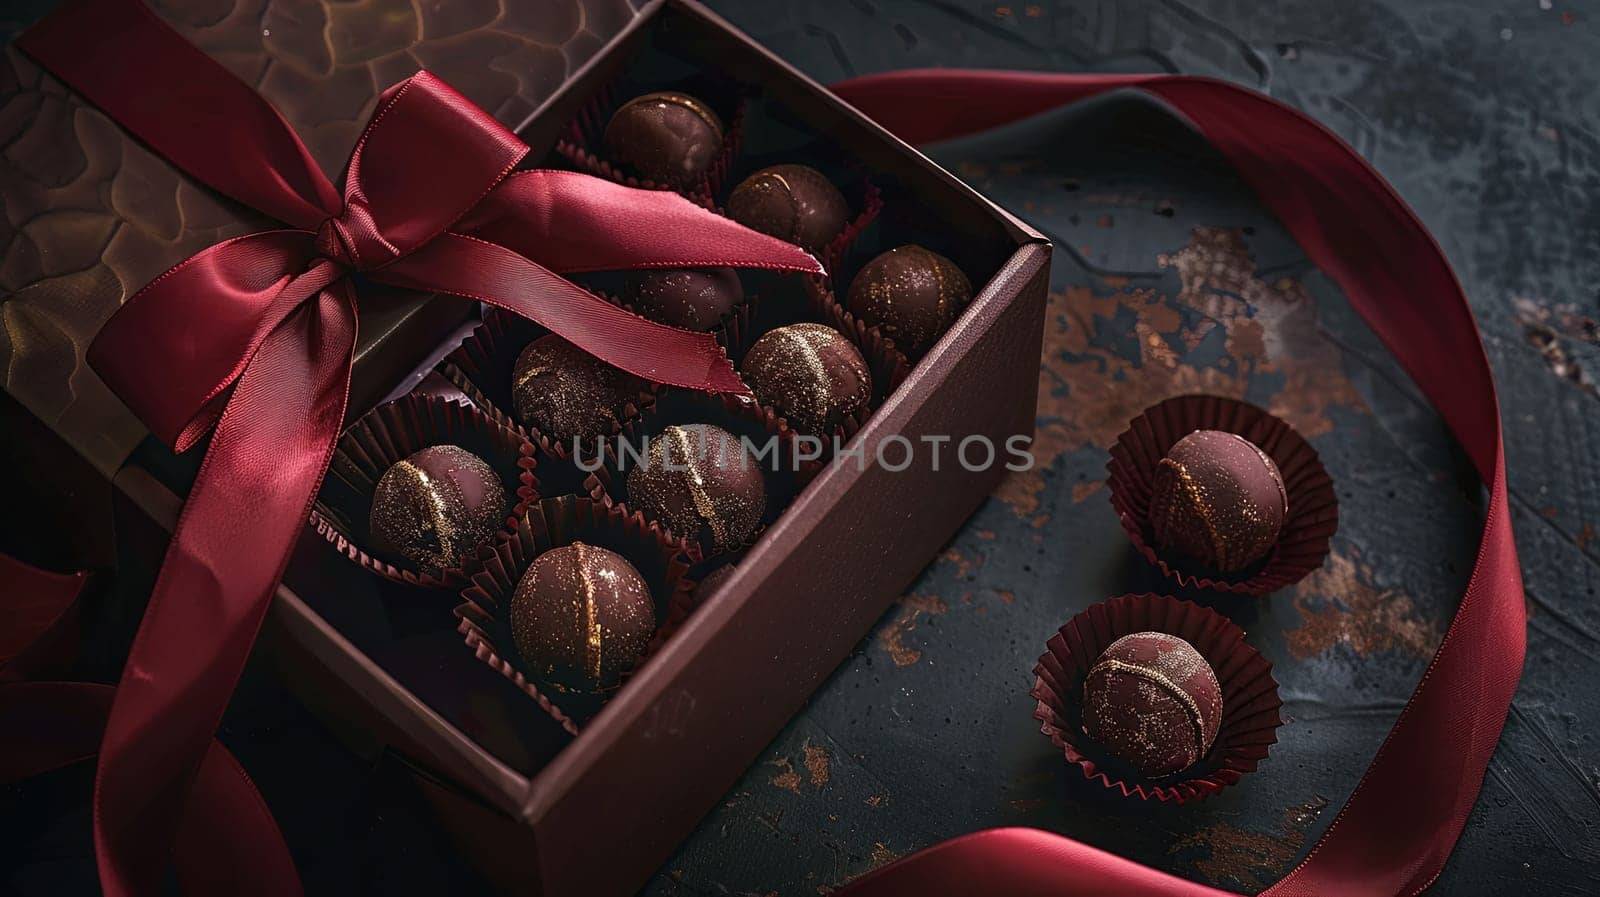 Luxurious box of chocolate truffles adorned with a vibrant red ribbon, creating an elegant presentation.